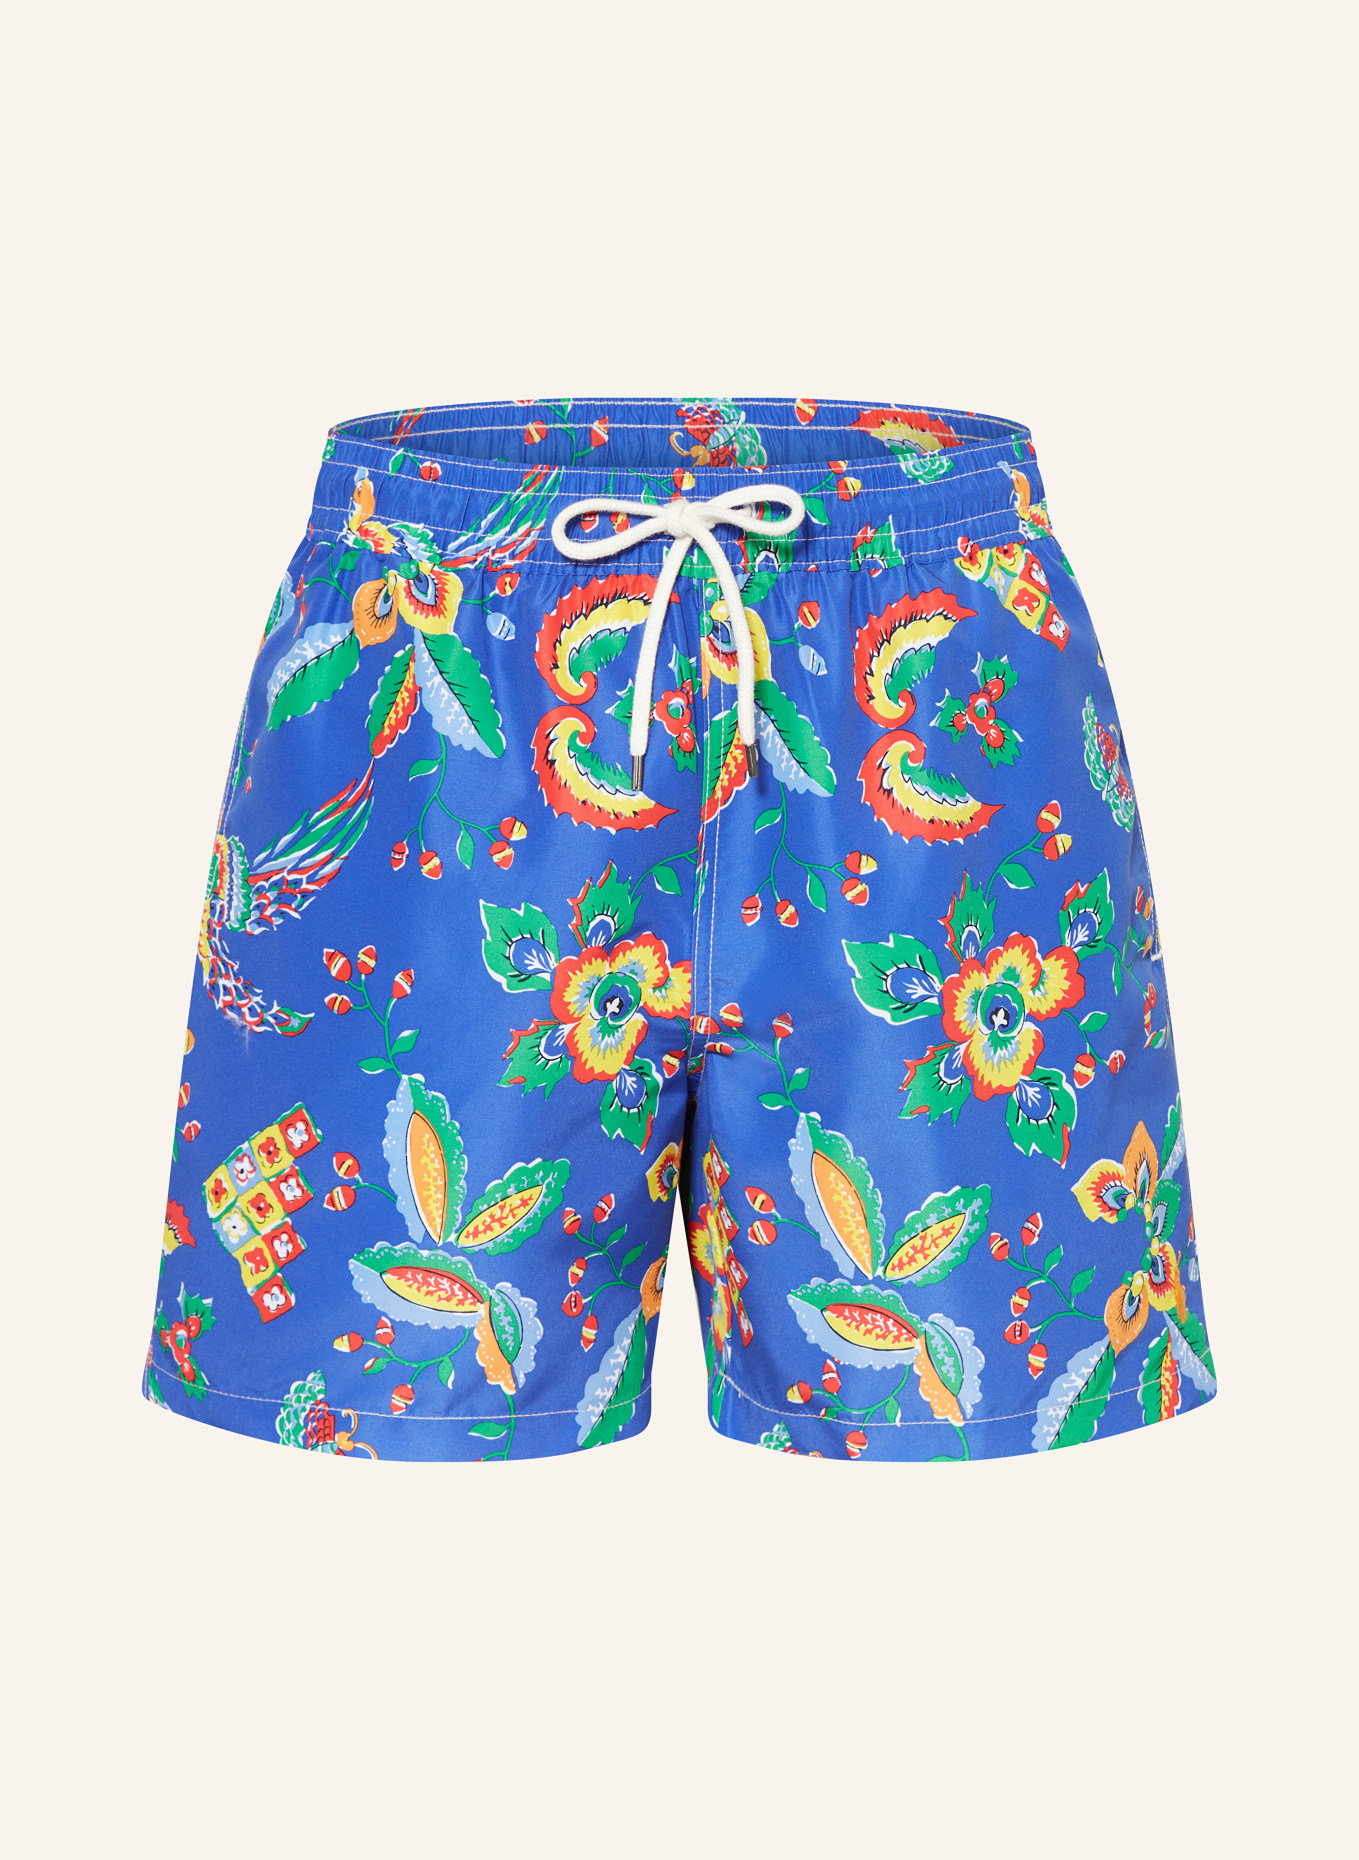 POLO RALPH LAUREN Swim shorts, Color: BLUE/ YELLOW/ RED (Image 1)